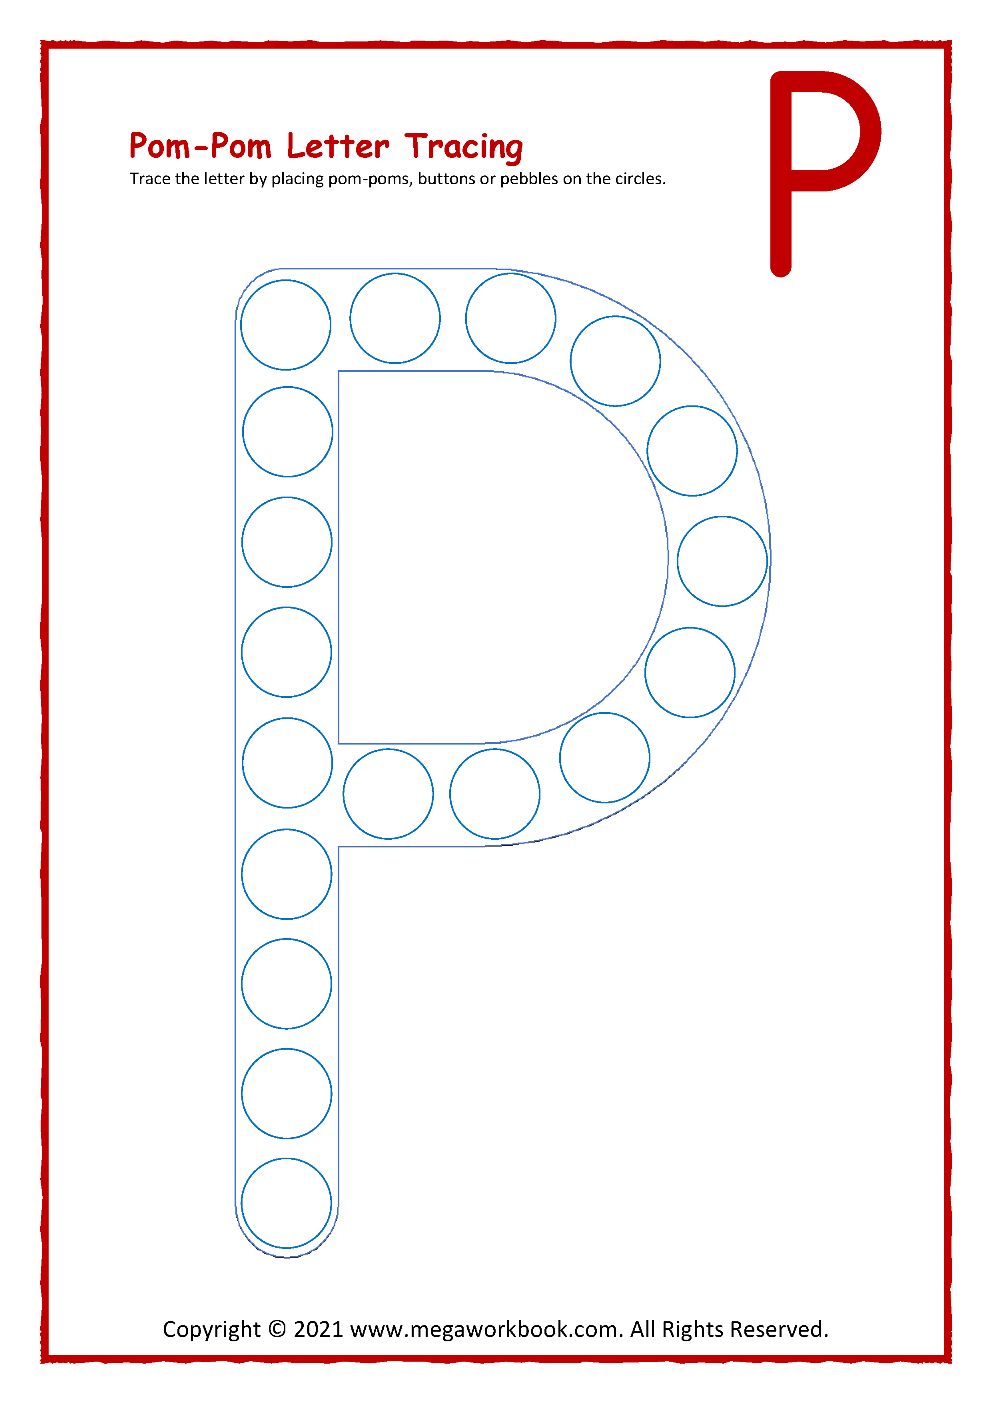 uppercase-letter-p-tracing-worksheet-doozy-moo